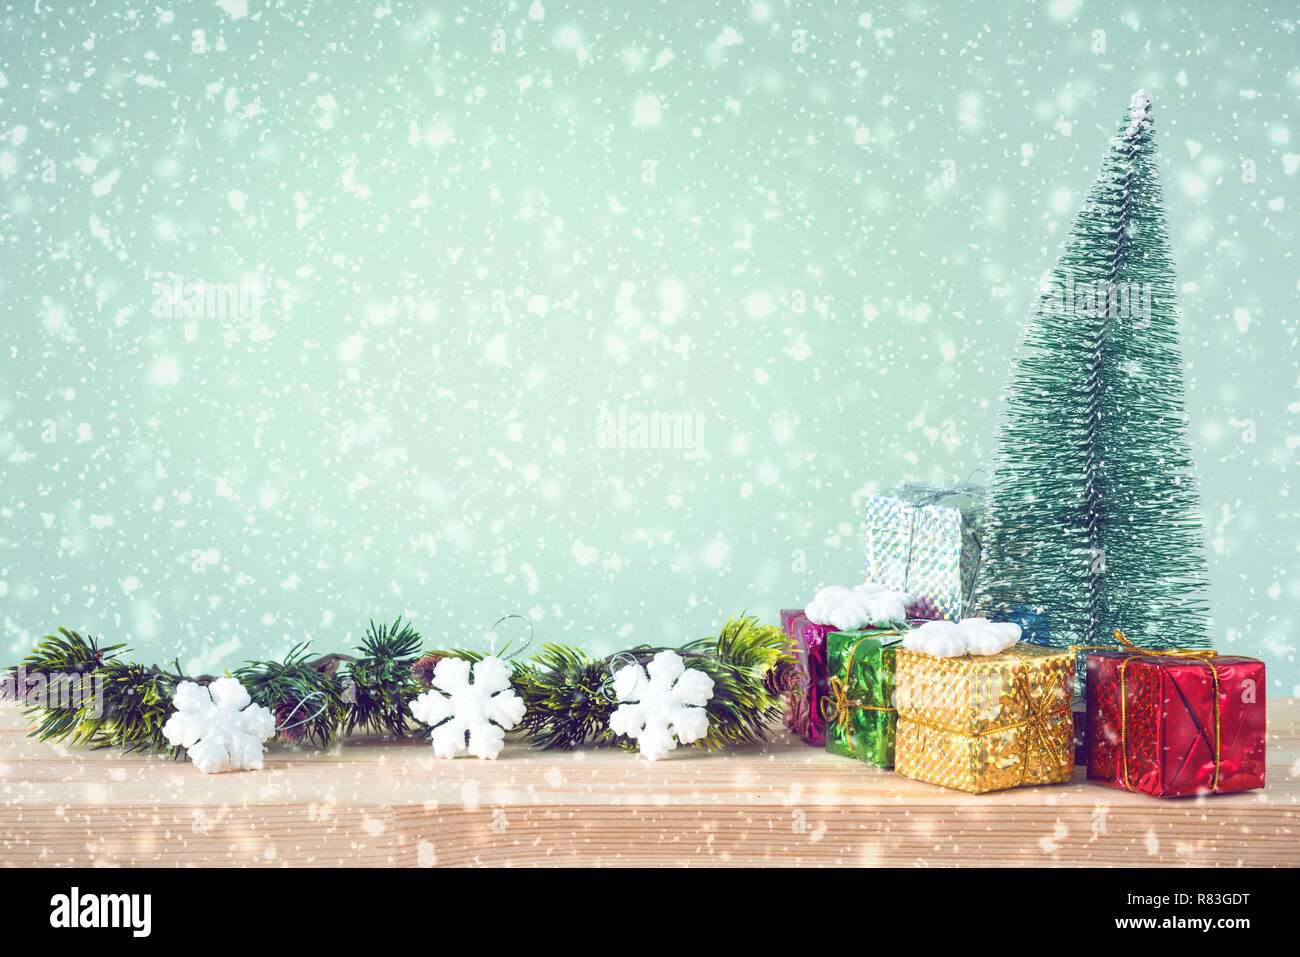 Christmas tree and decorations in snowy weather Stock Photo